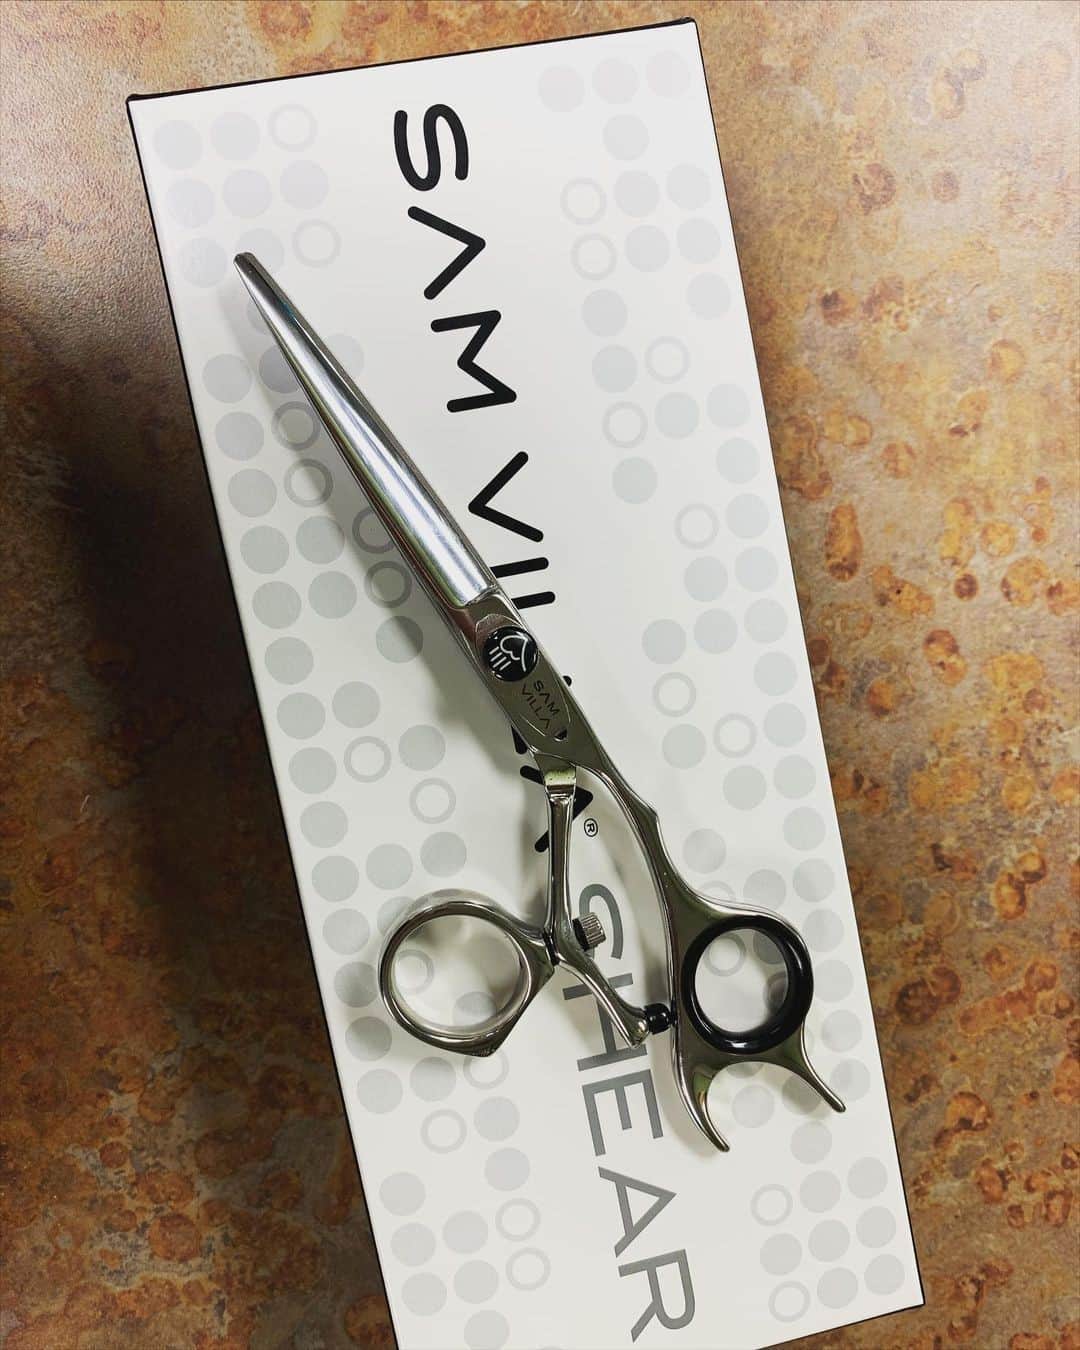 Sam Villaのインスタグラム：「Your body is the most important and most fragile tool that you own. Protect it and your ability to do what you love with a shear that works with your body, not against it. Instead of forcing your arm into awkward and uncomfortable positions to get the right angles, this swivel shear keeps your wrist straight and your elbow down throughout every #haircut⠀ ⠀ Product featured: #SamVilla SIGNATURE SERIES SWIVEL SHEAR⠀ ⠀ ✖️ Shop these shears and more on SAMVILLA.COM . 0% Financing available on purchases✖️ ⠀ ⠀ 📷 : @lisaj_hairnails」